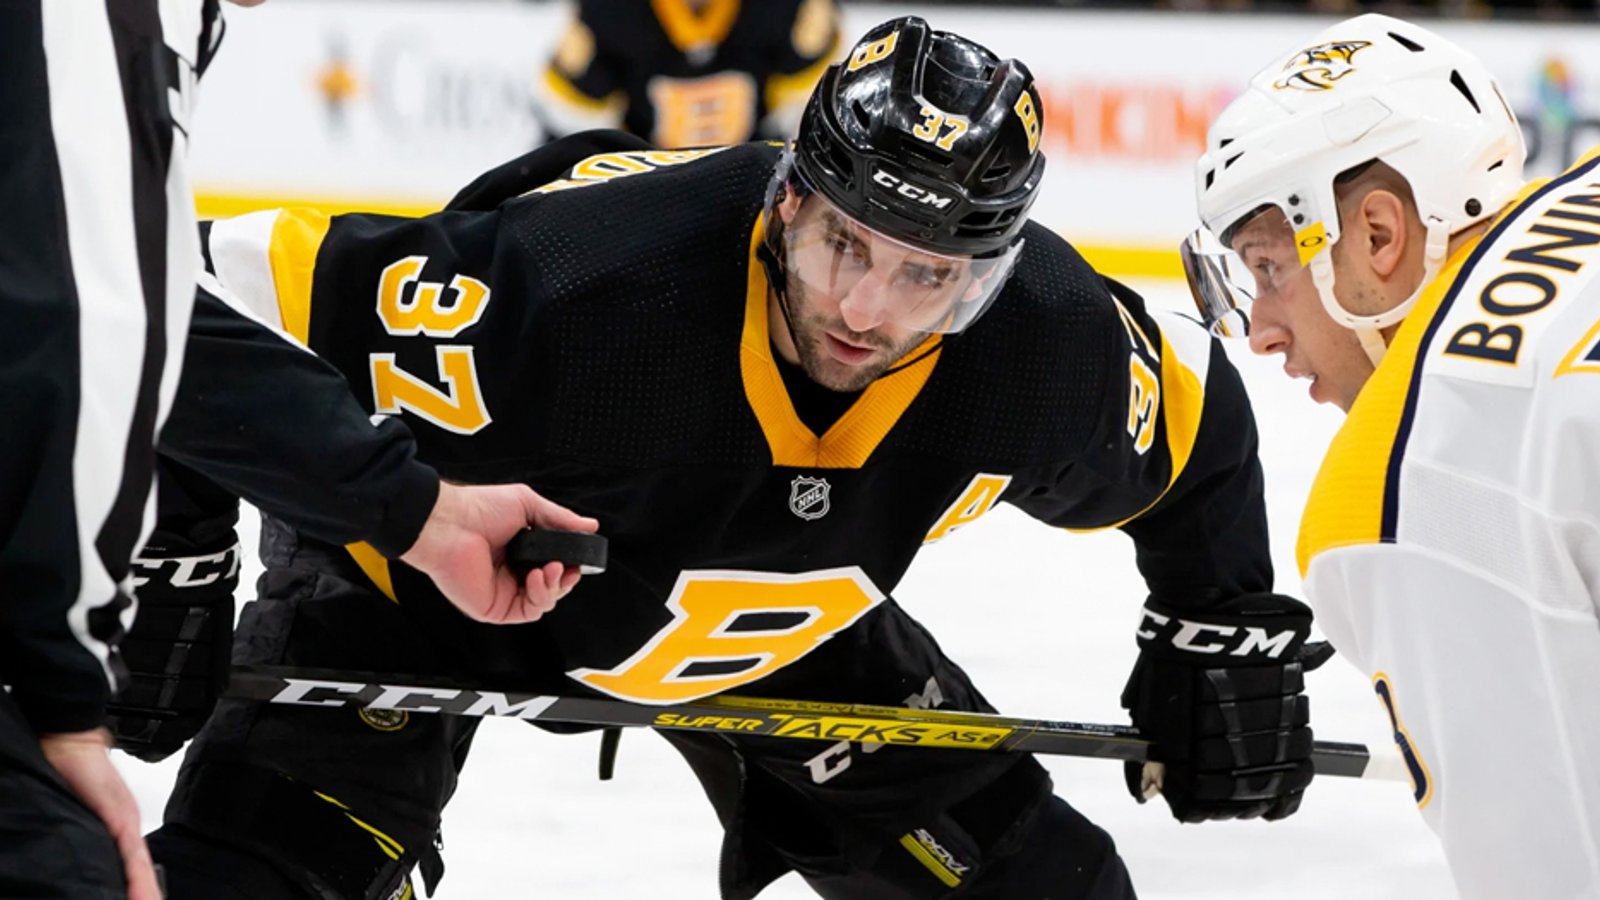 Bergeron steps up with not only a statement, but a huge charitable donation as well